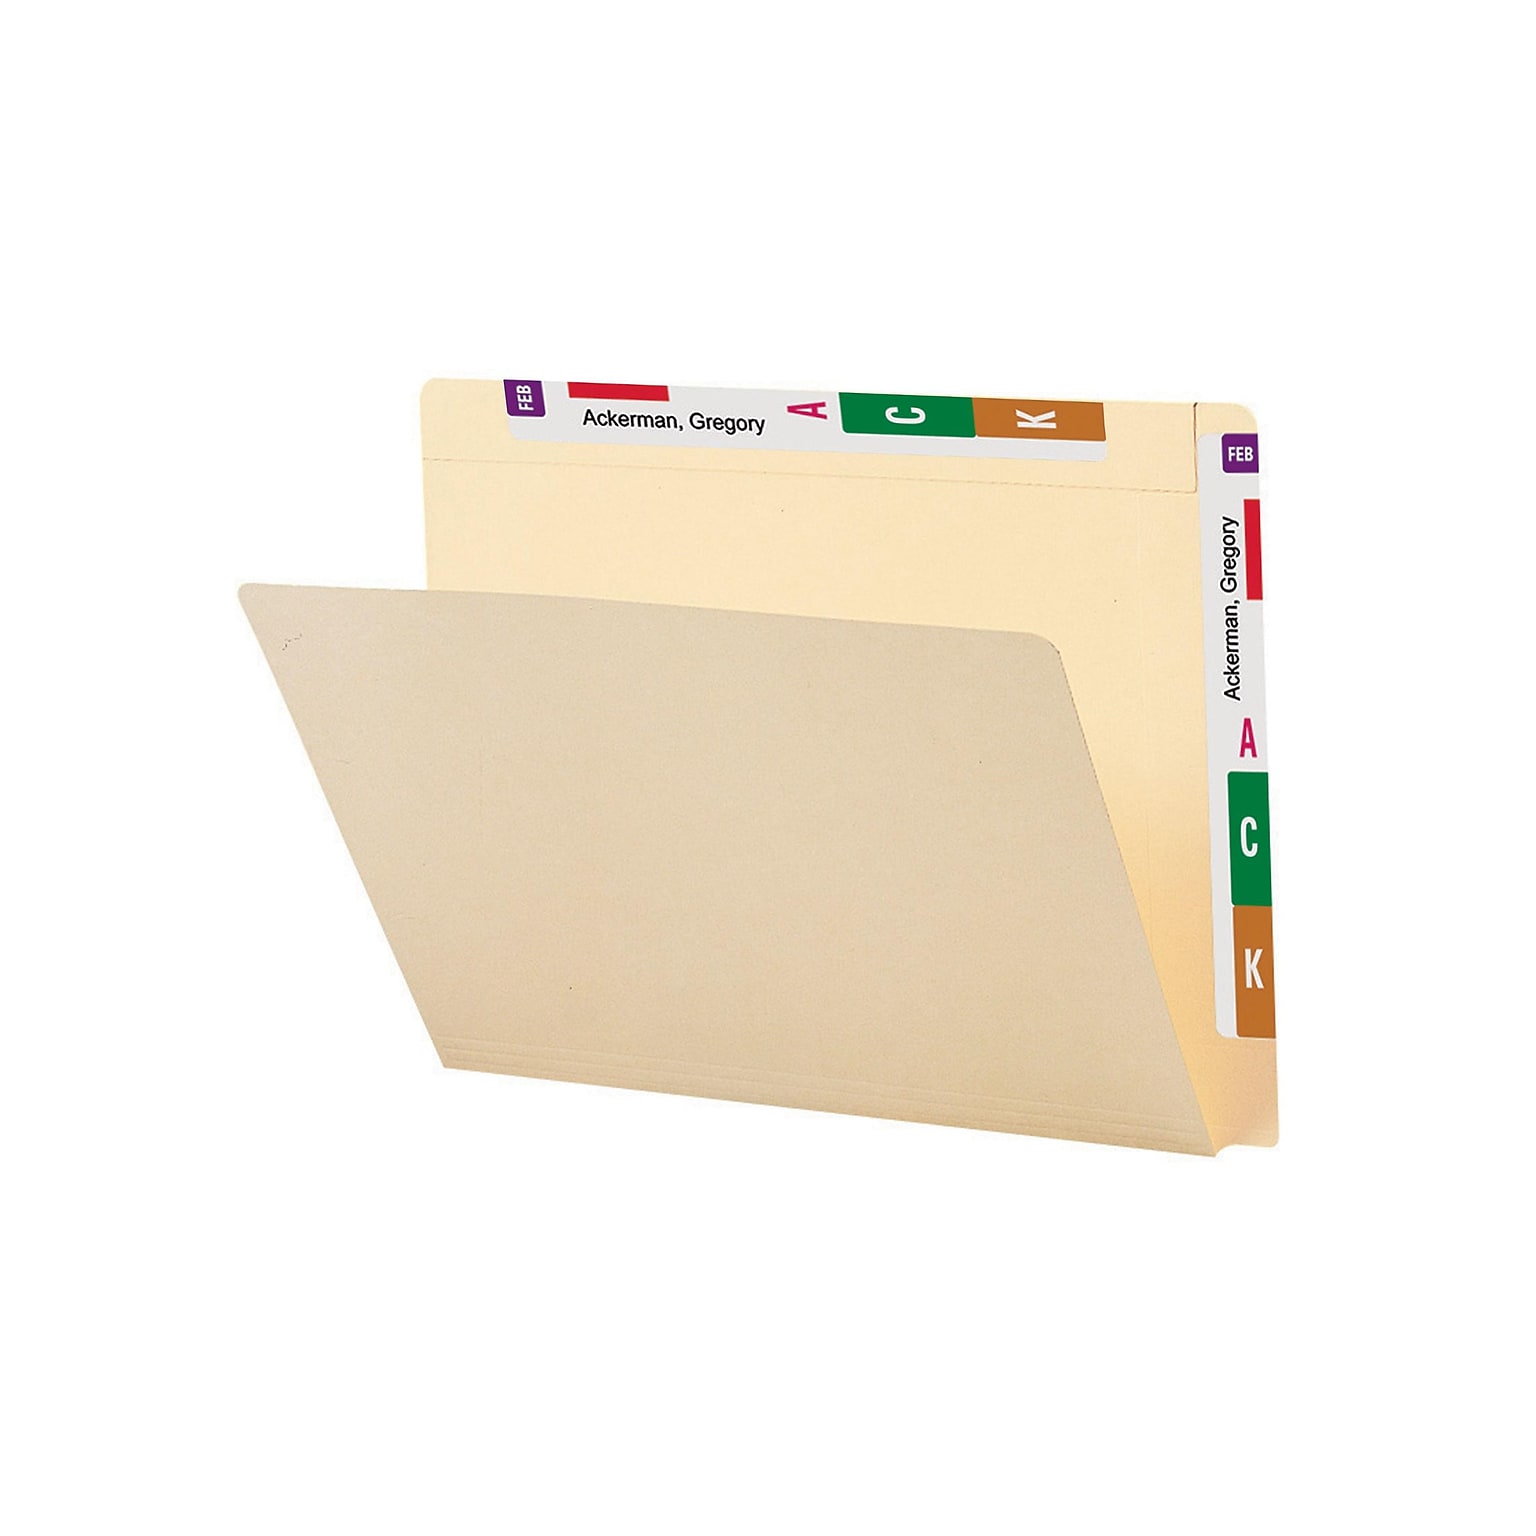 Smead Conversion Top and End-Tab File Folders, Straight-Cut Tabs, Letter Size, Manila, 100/Box (24190)